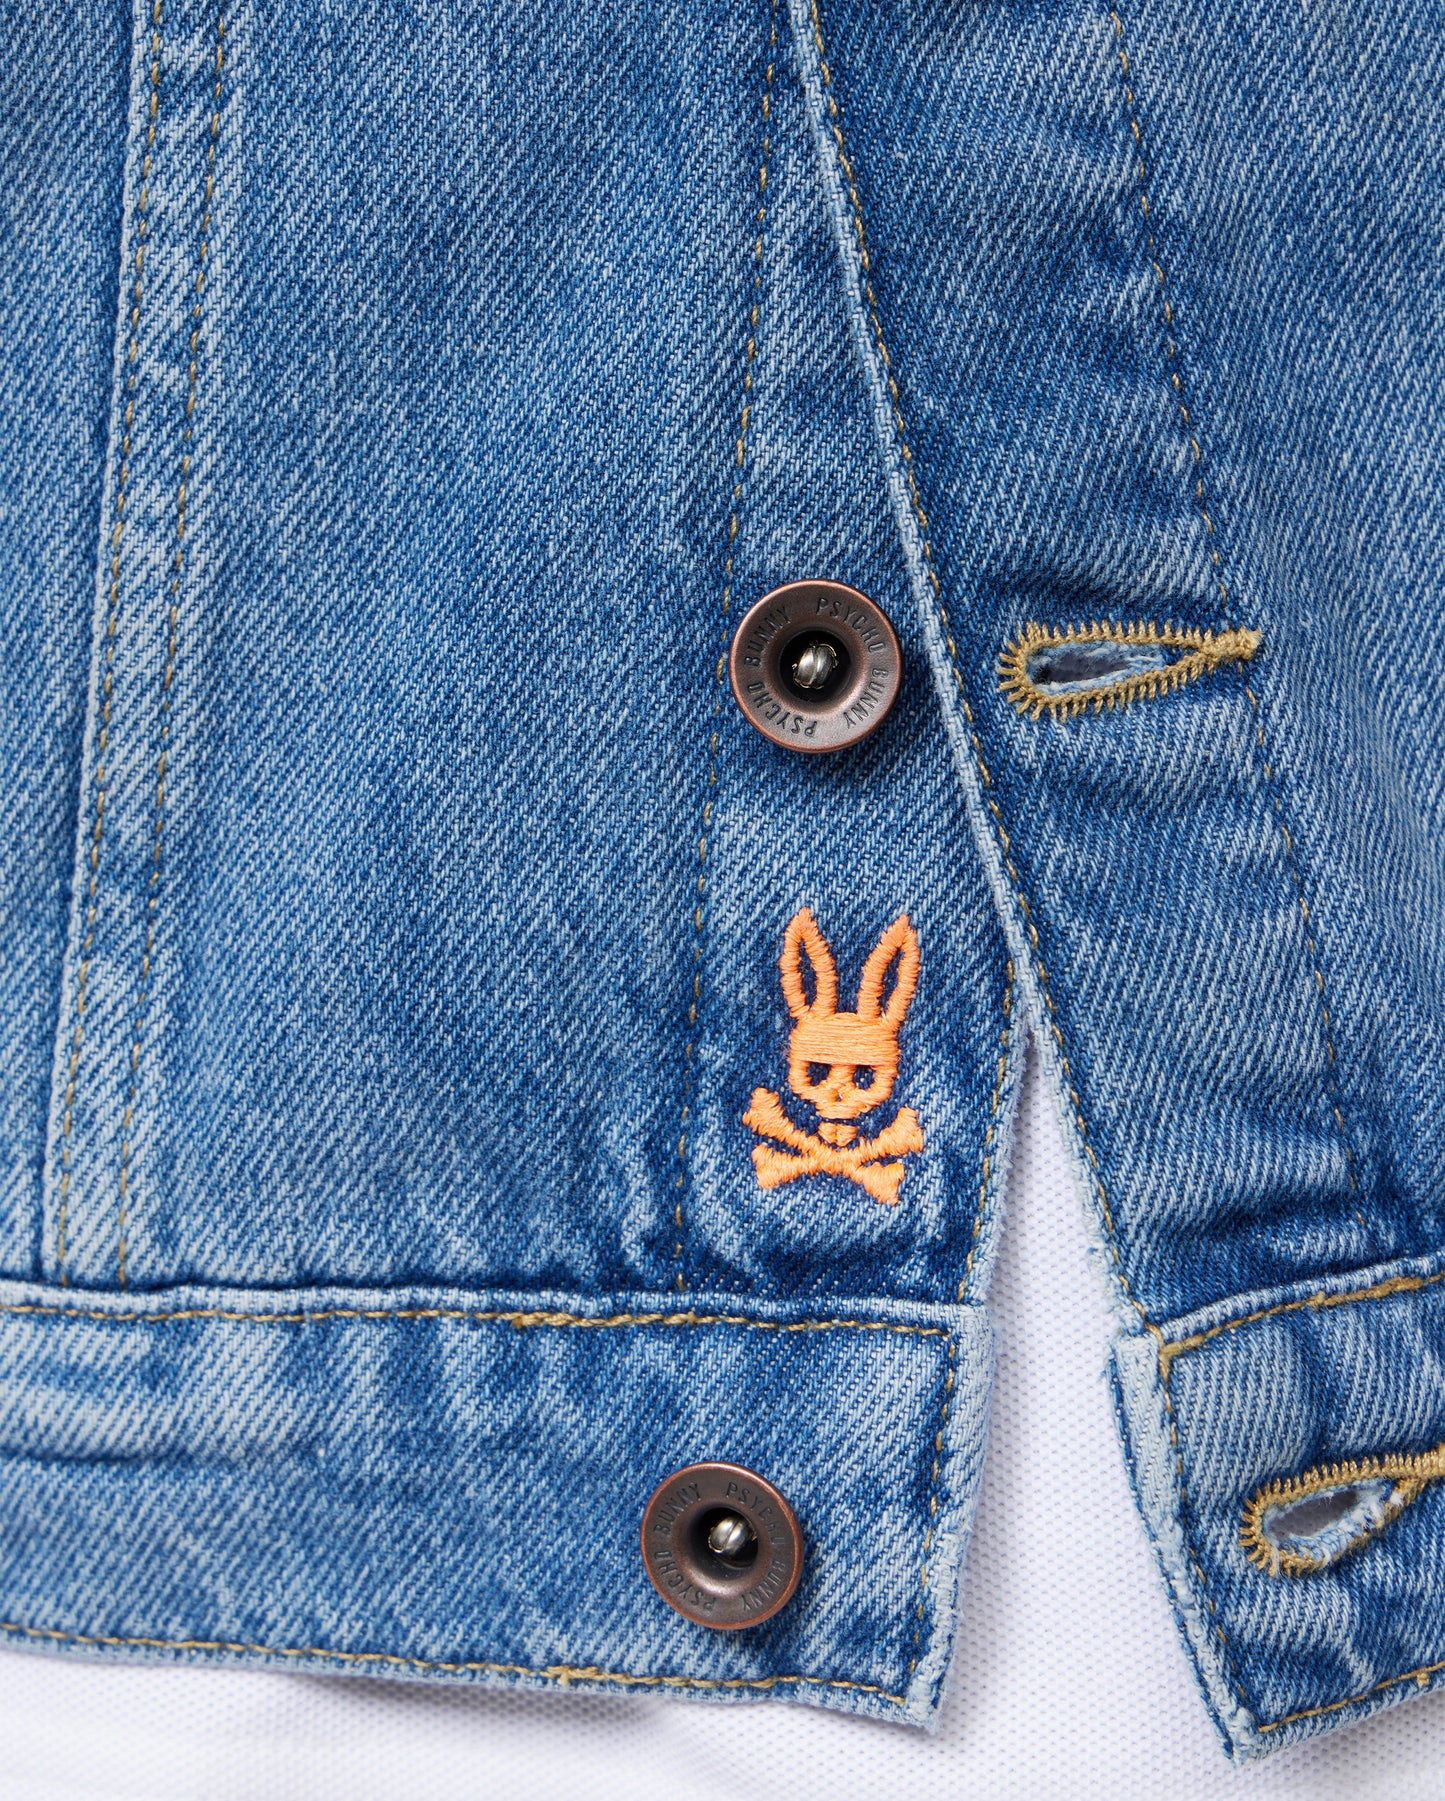 MAGIC BUNNY PATCH - for Jeans etc